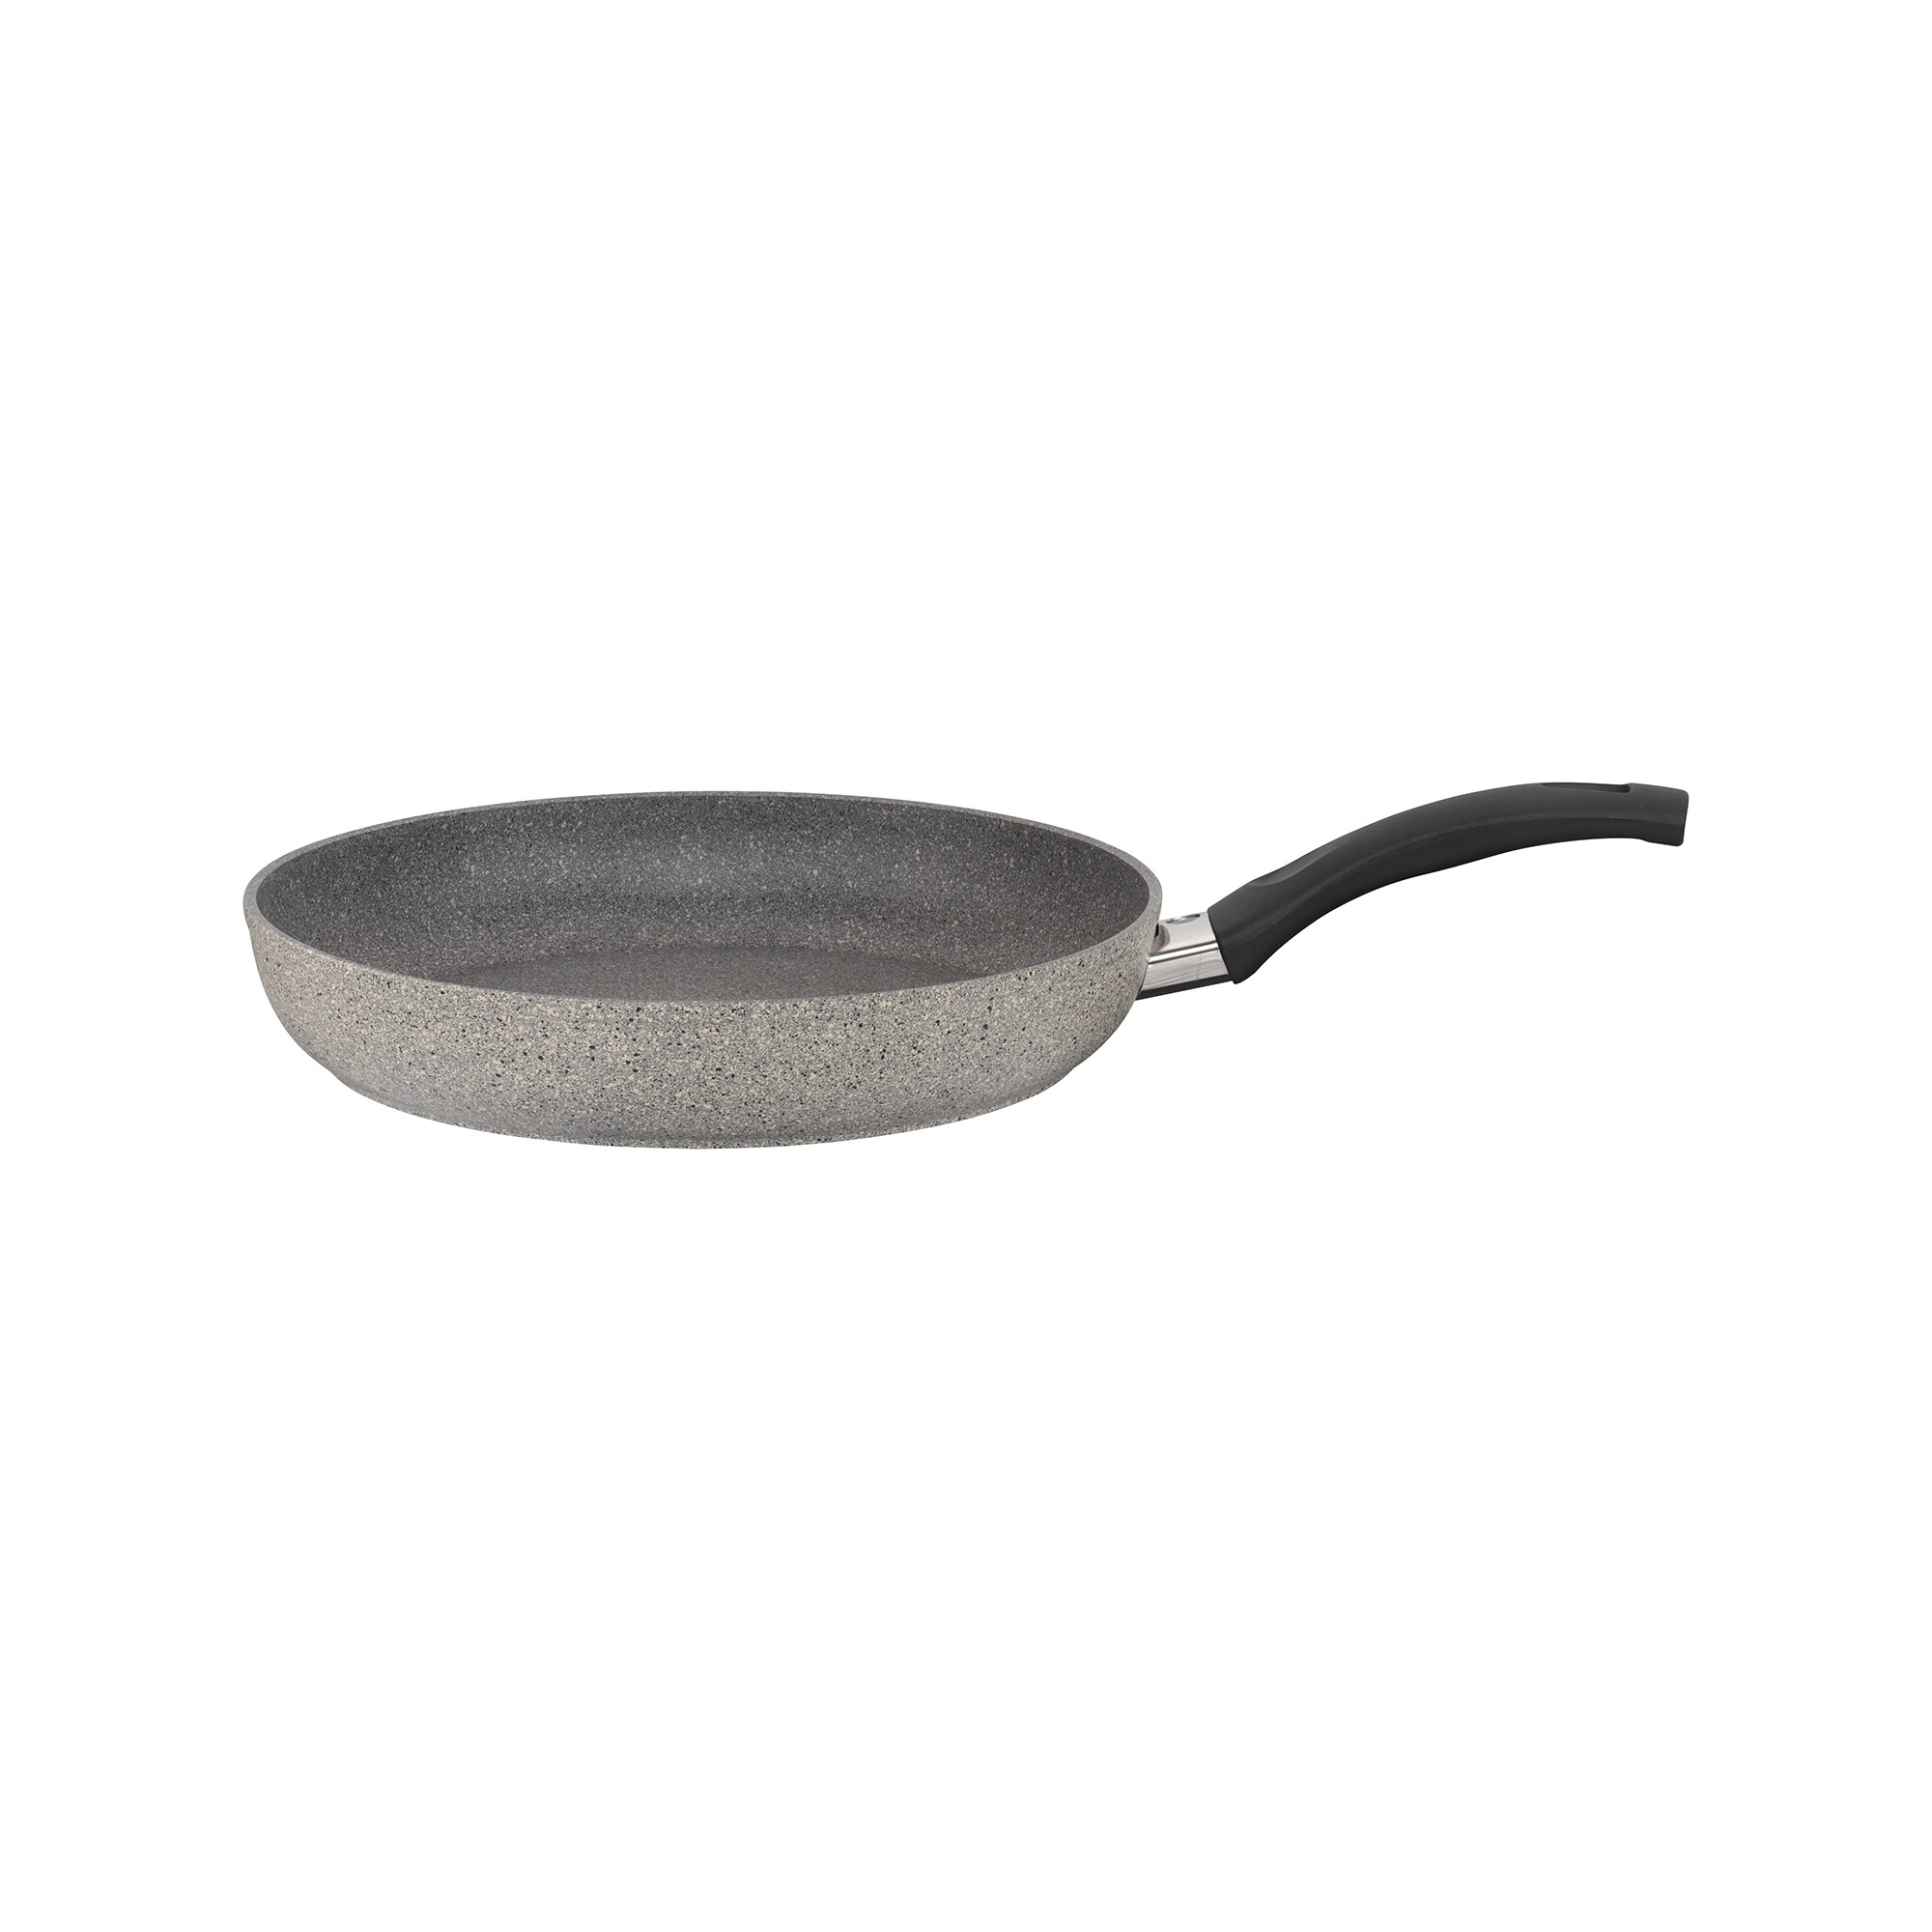 https://ak1.ostkcdn.com/images/products/is/images/direct/be1a1d20fc01f27d536860785a1581eb3abd8510/Ballarini-Parma-Forged-Aluminum-Nonstick-Fry-Pan.jpg